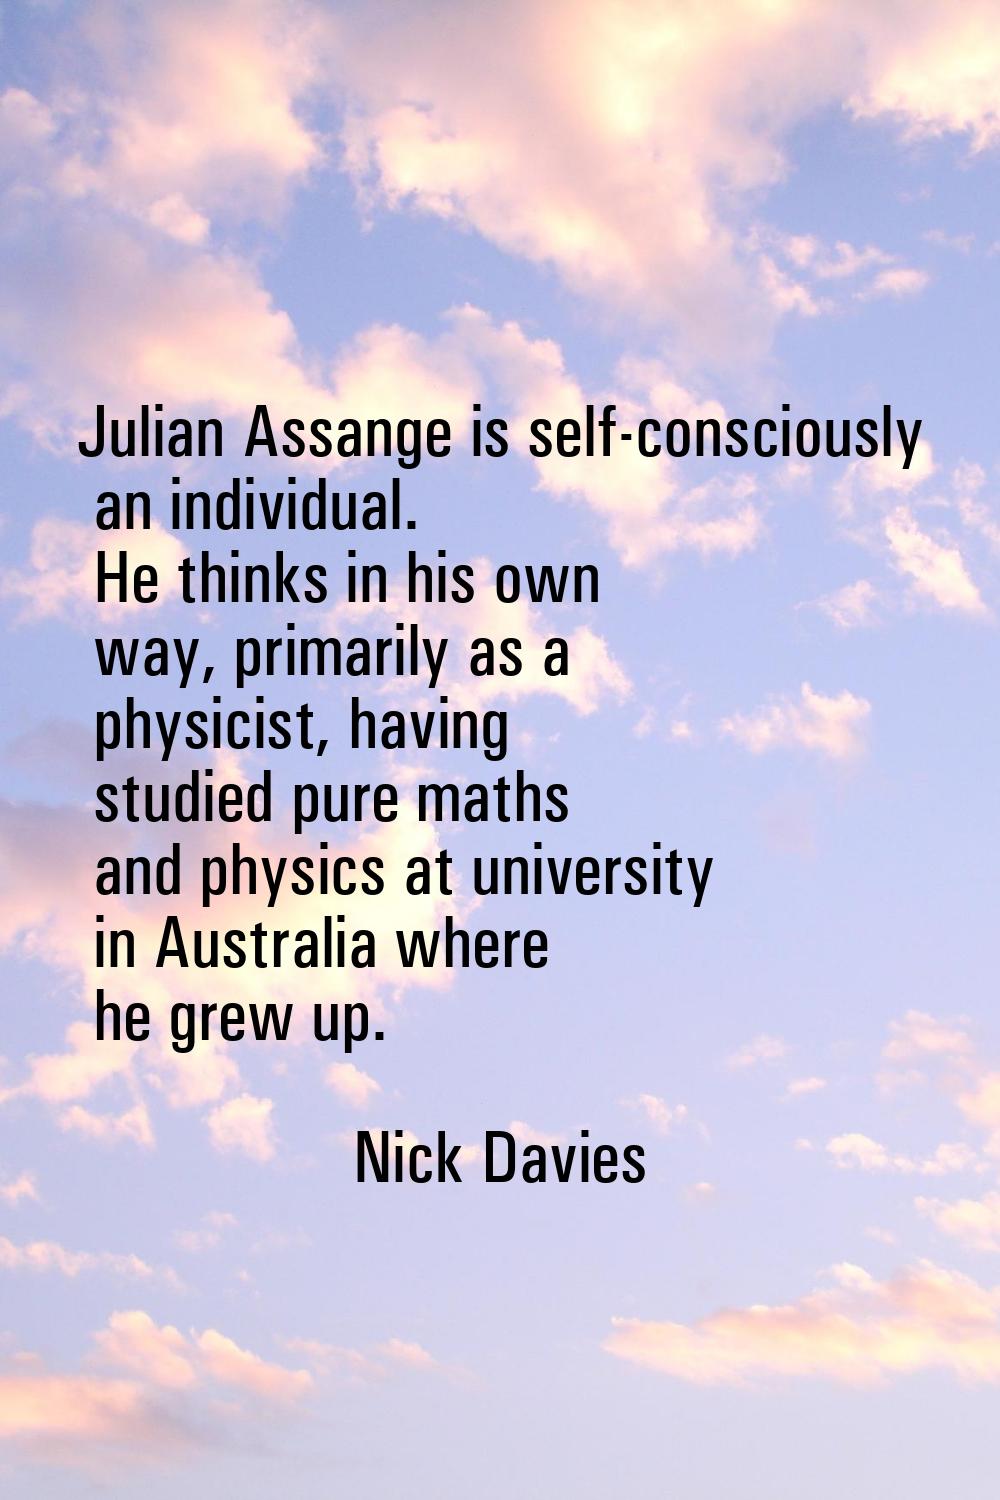 Julian Assange is self-consciously an individual. He thinks in his own way, primarily as a physicis